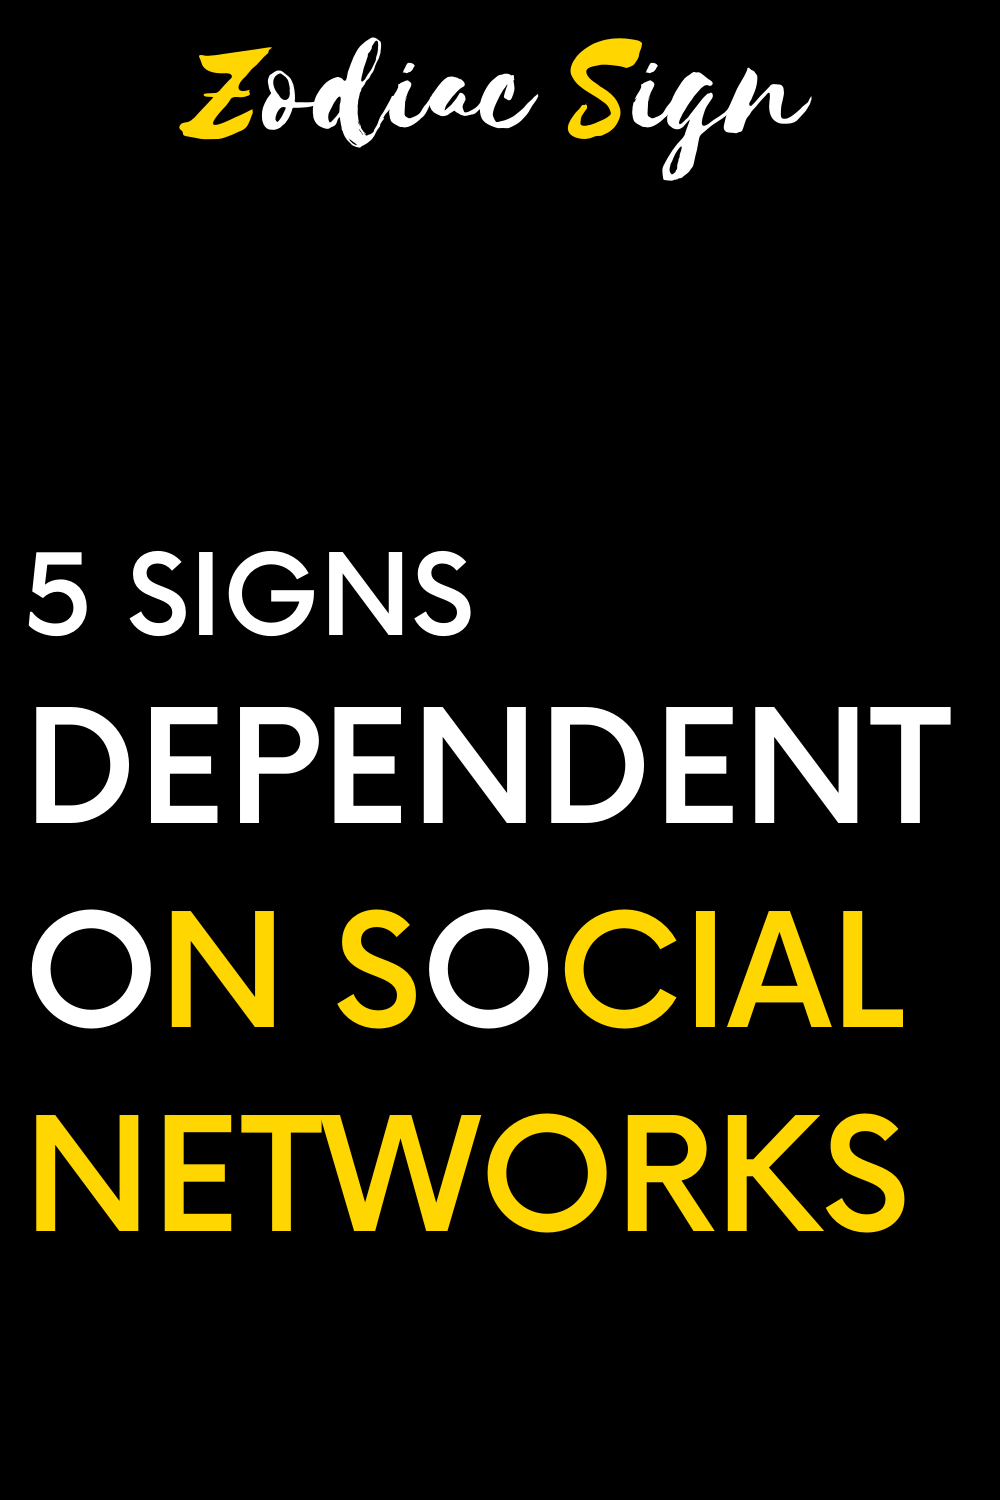 5 signs dependent on social networks